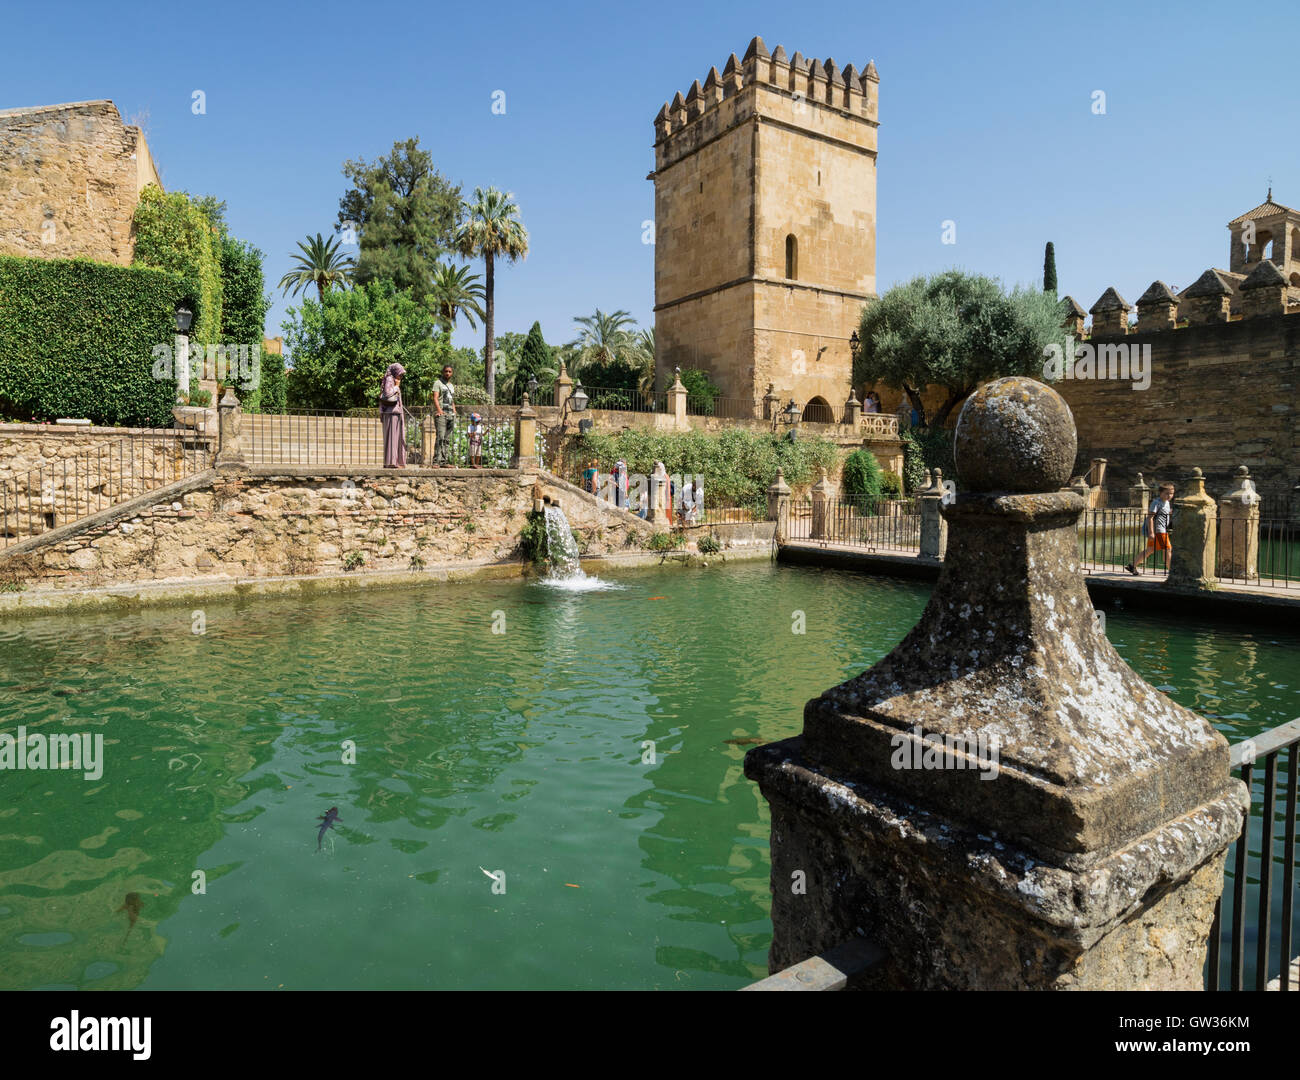 Cordoba, Cordoba Province, Andalusia, southern Spain.   The pond in the gardens of the Alcazar of the Christian Kings. Stock Photo